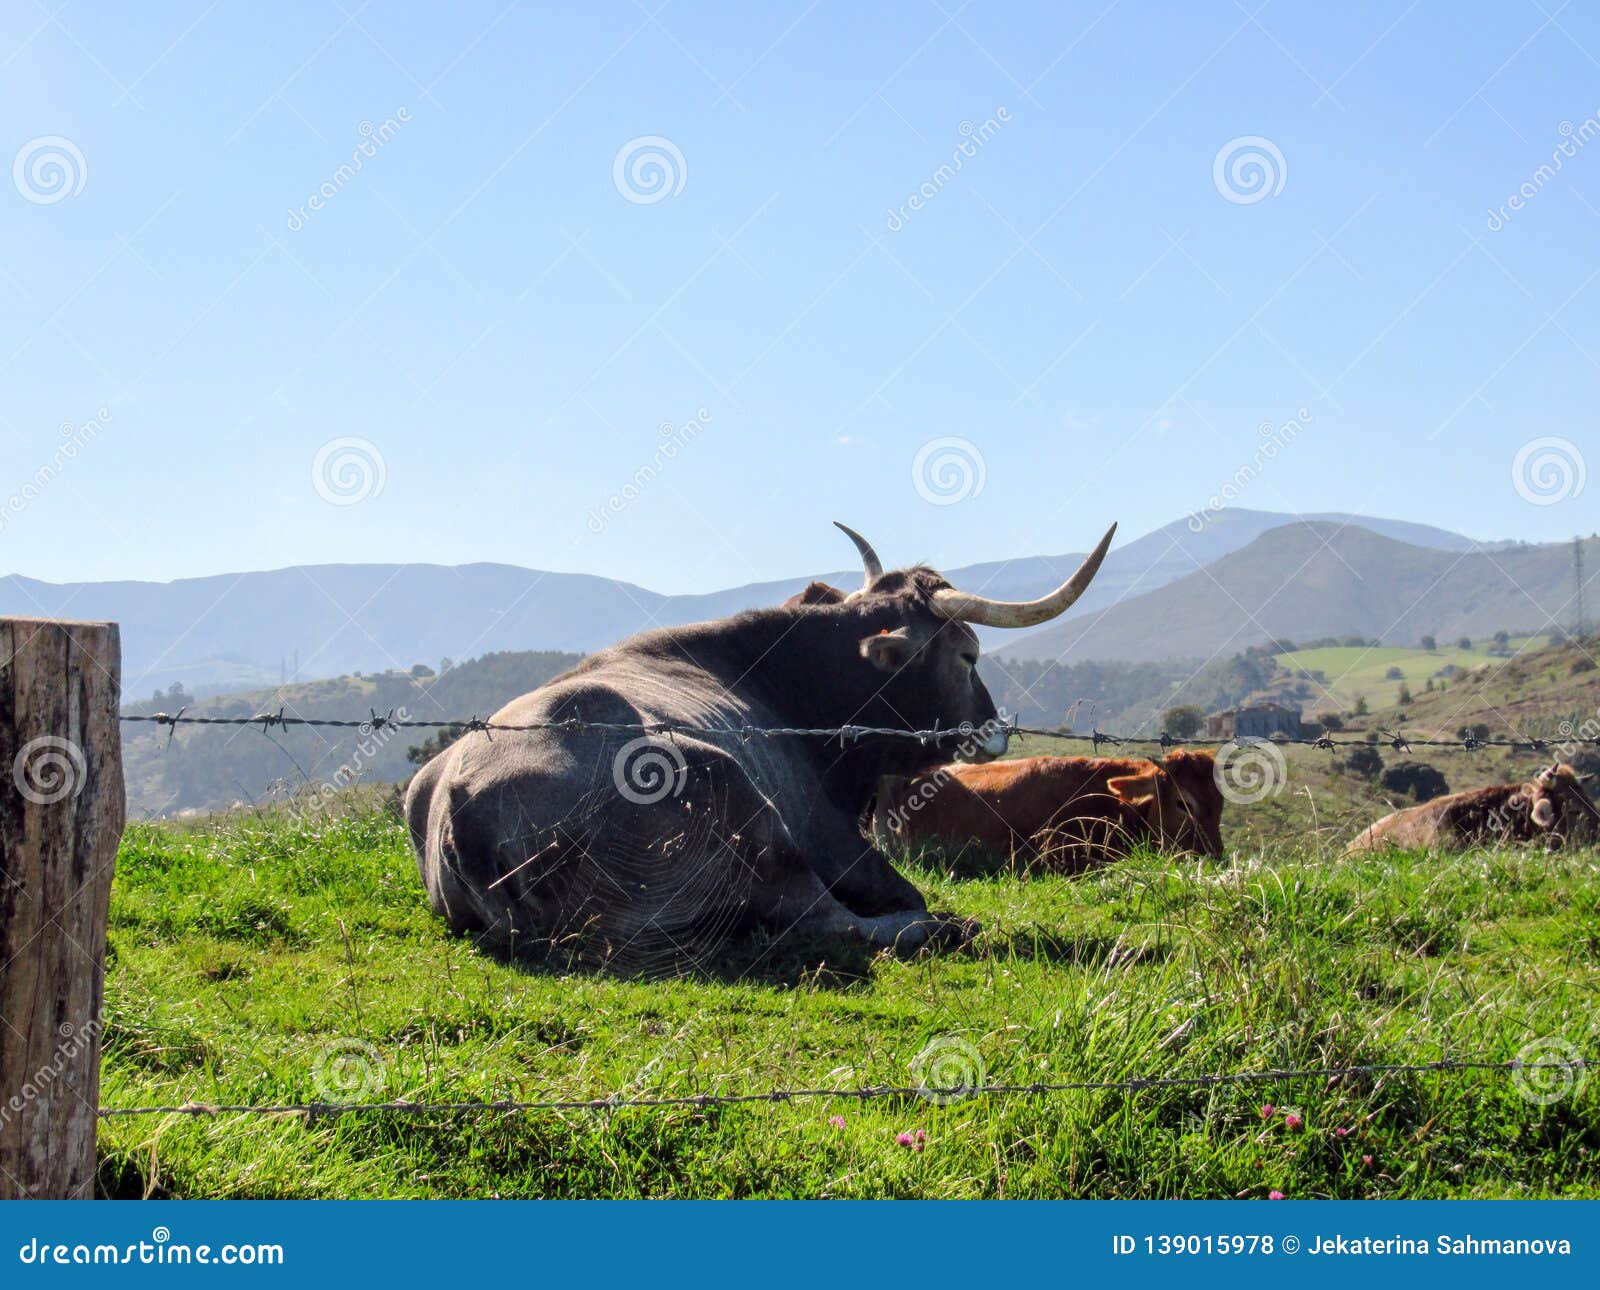 big cow with the picos de europa, part of the cantabrian mountains in northern spain